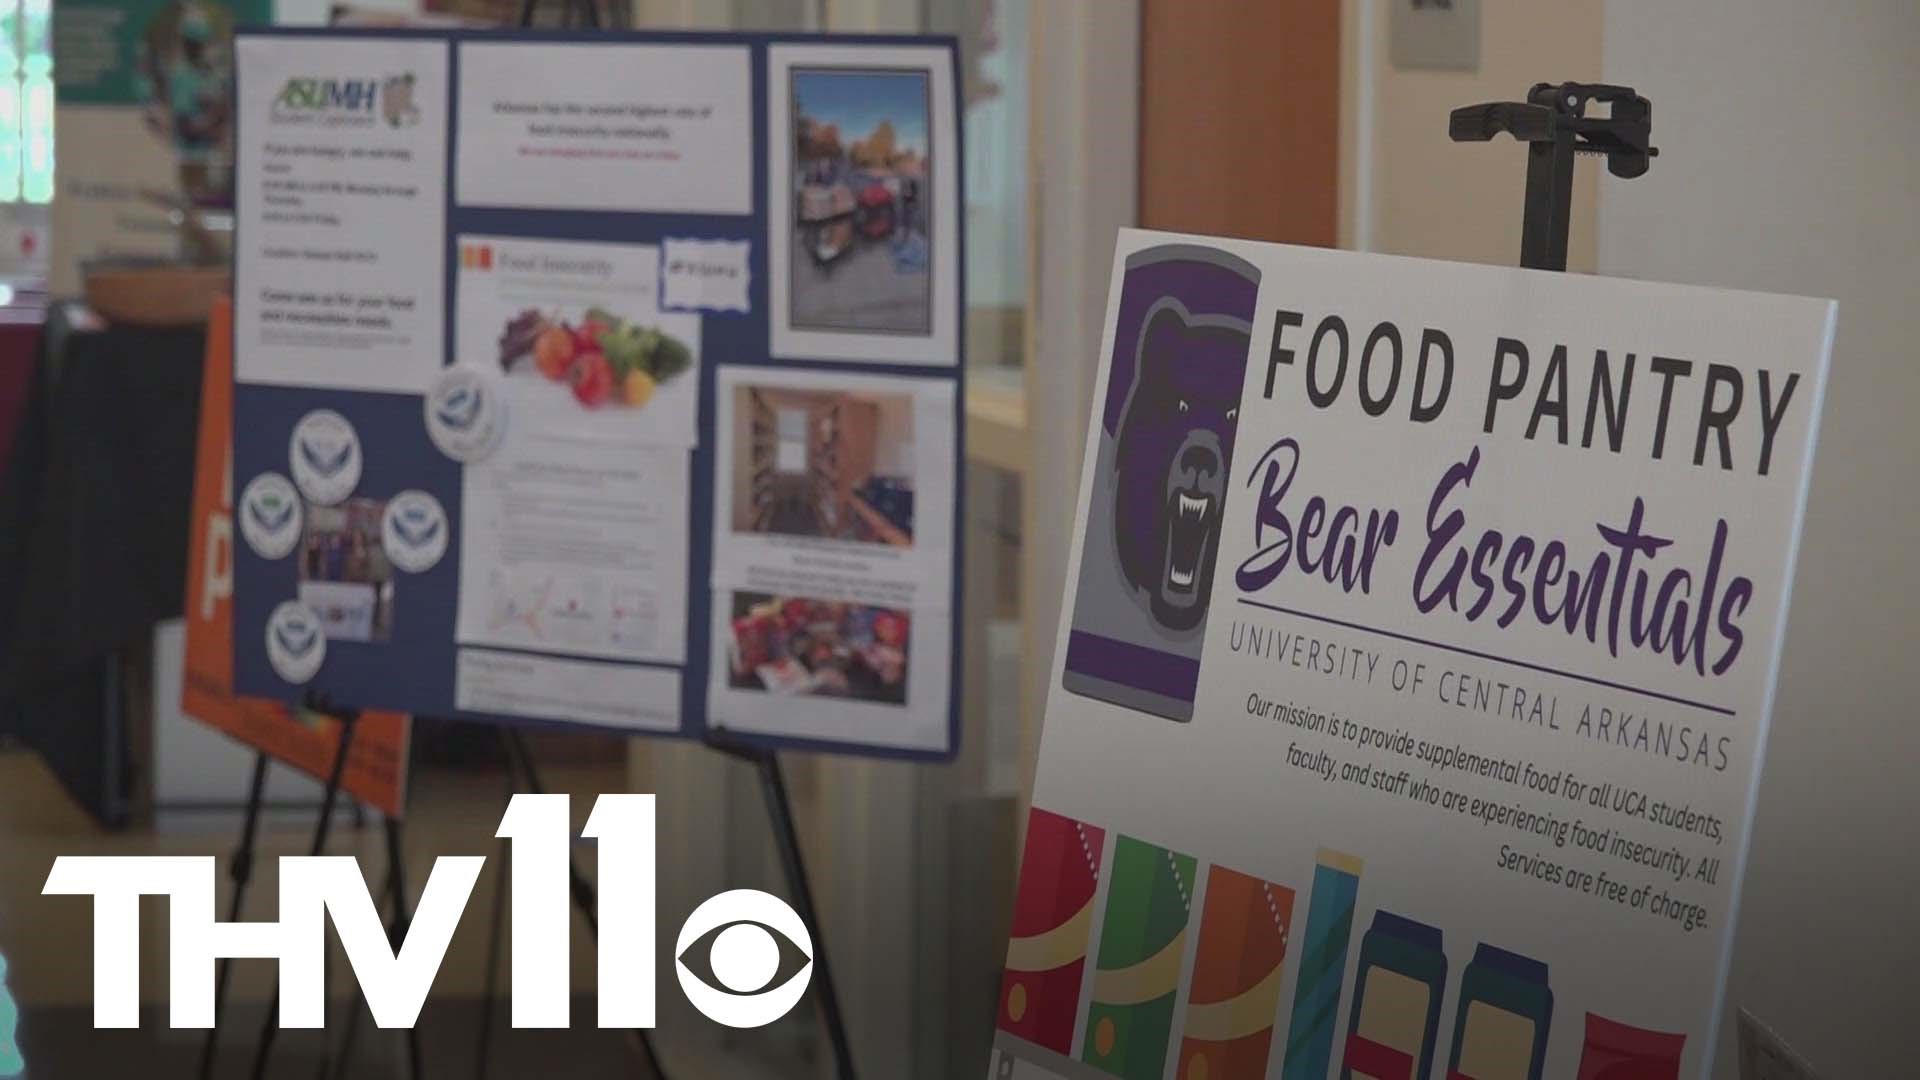 Over 25 colleges attended a College Hunger Summit aimed at ensuring state colleges have the resources needed to solve the problem of food insecurity.